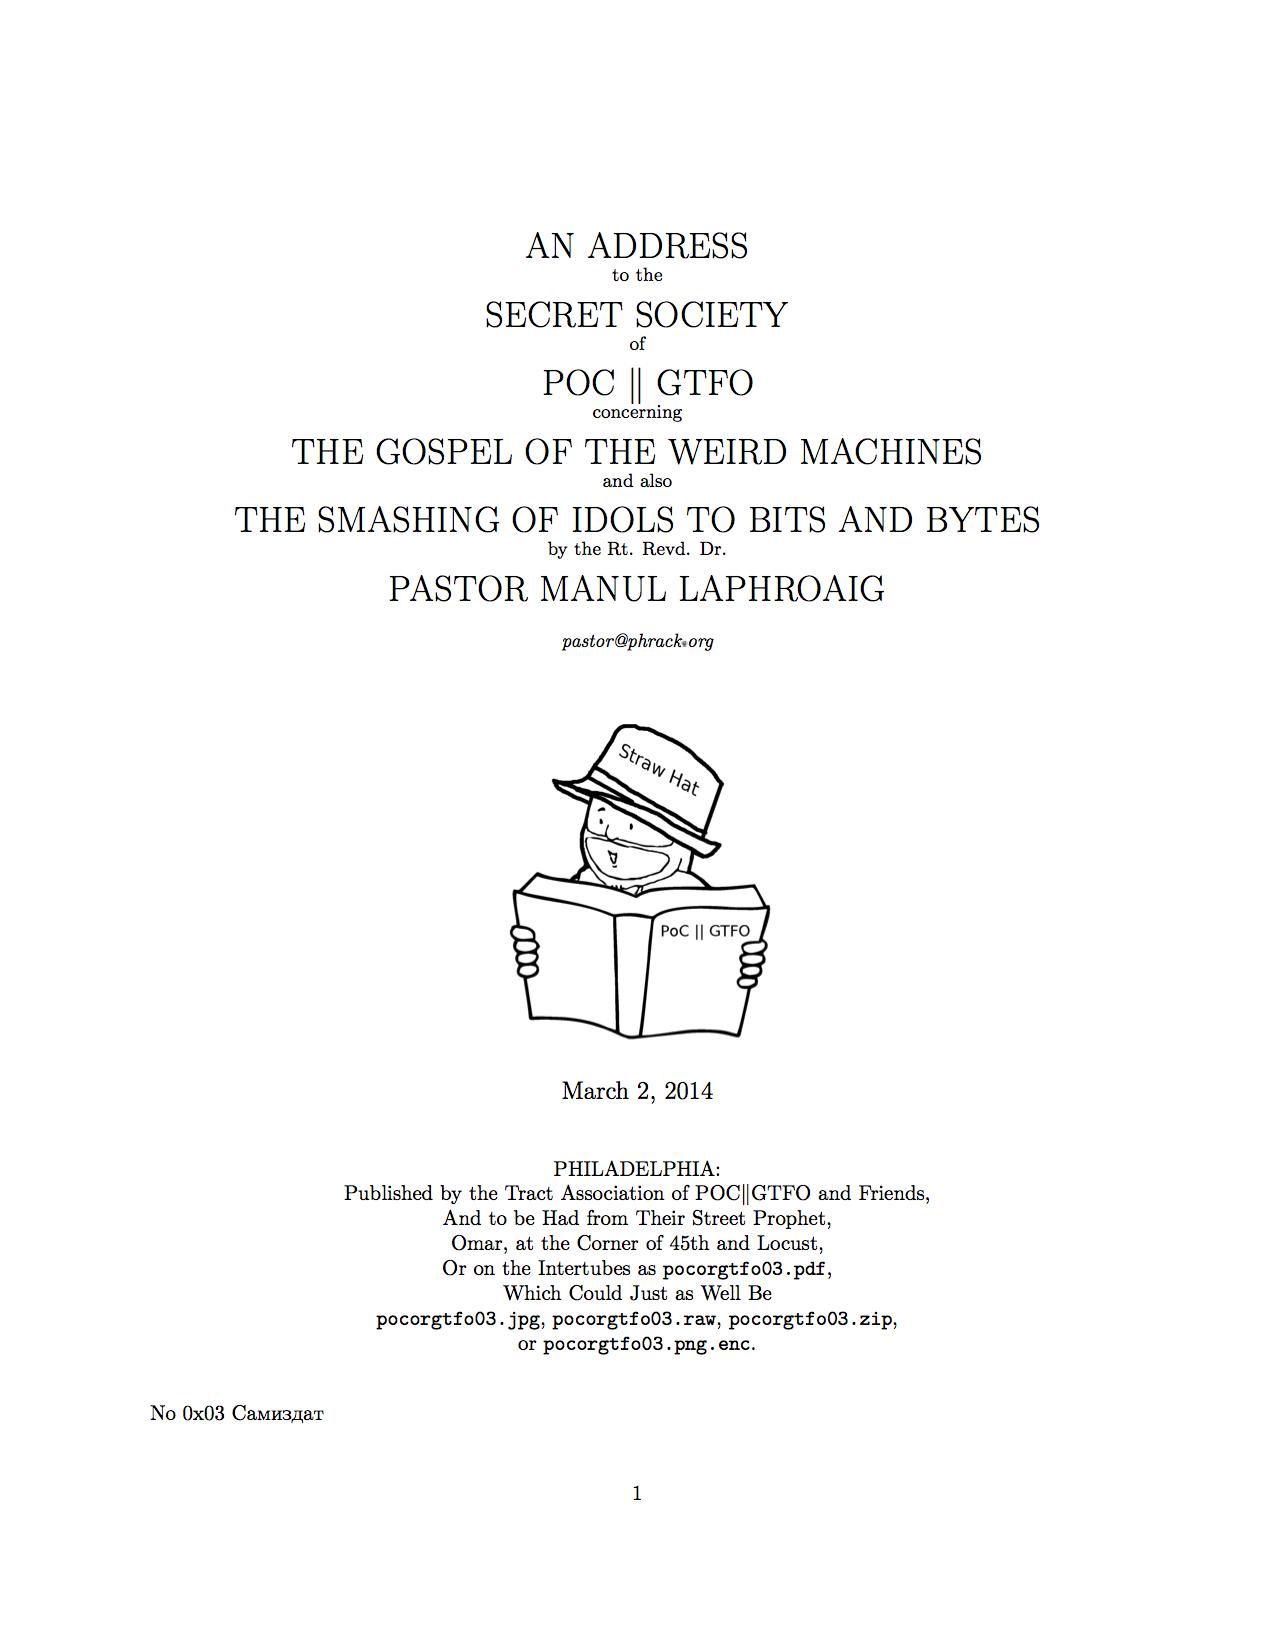 AN ADDRESS to the SECRET SOCIETY of POC $\|$ GTFO concerning THE GOSPEL OF THE WEIRD MACHINES and also THE SMASHING OF IDOLS TO BITS AND BYTES by the Rt. Revd. Dr. PASTOR MANUL LAPHROAIG